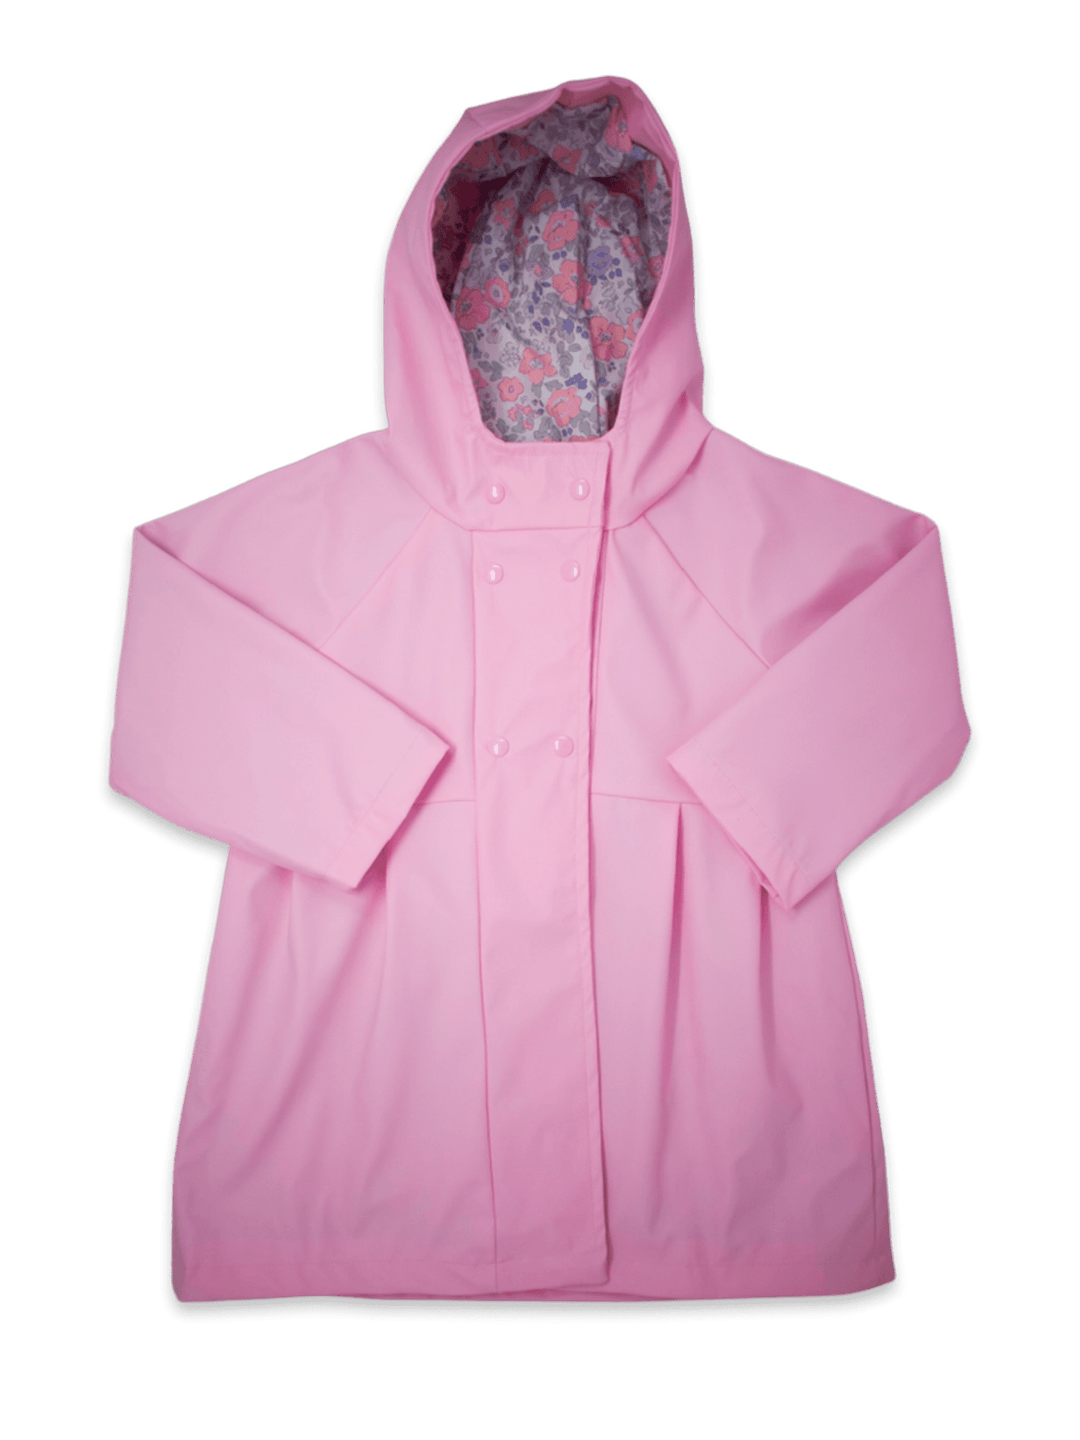 Rainy Day Raincoat - Pink with Floral Liner